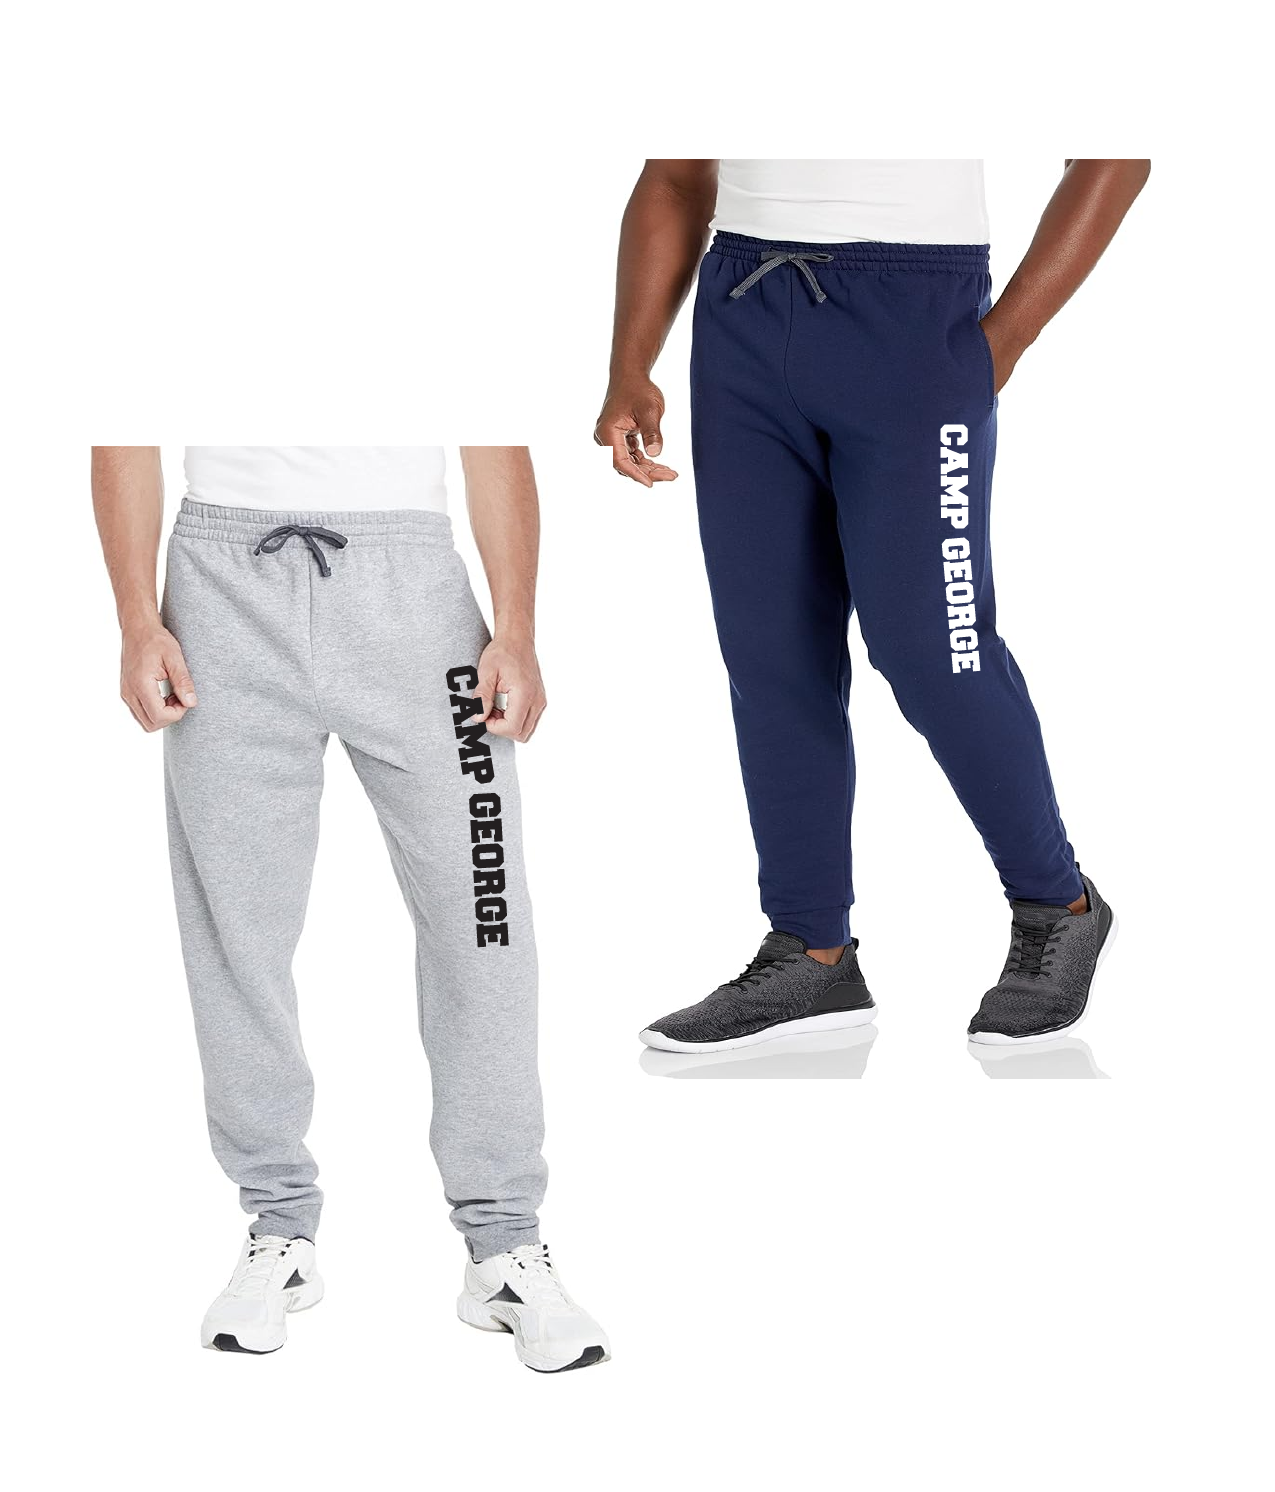 grey and navy joggers with camp george down the side